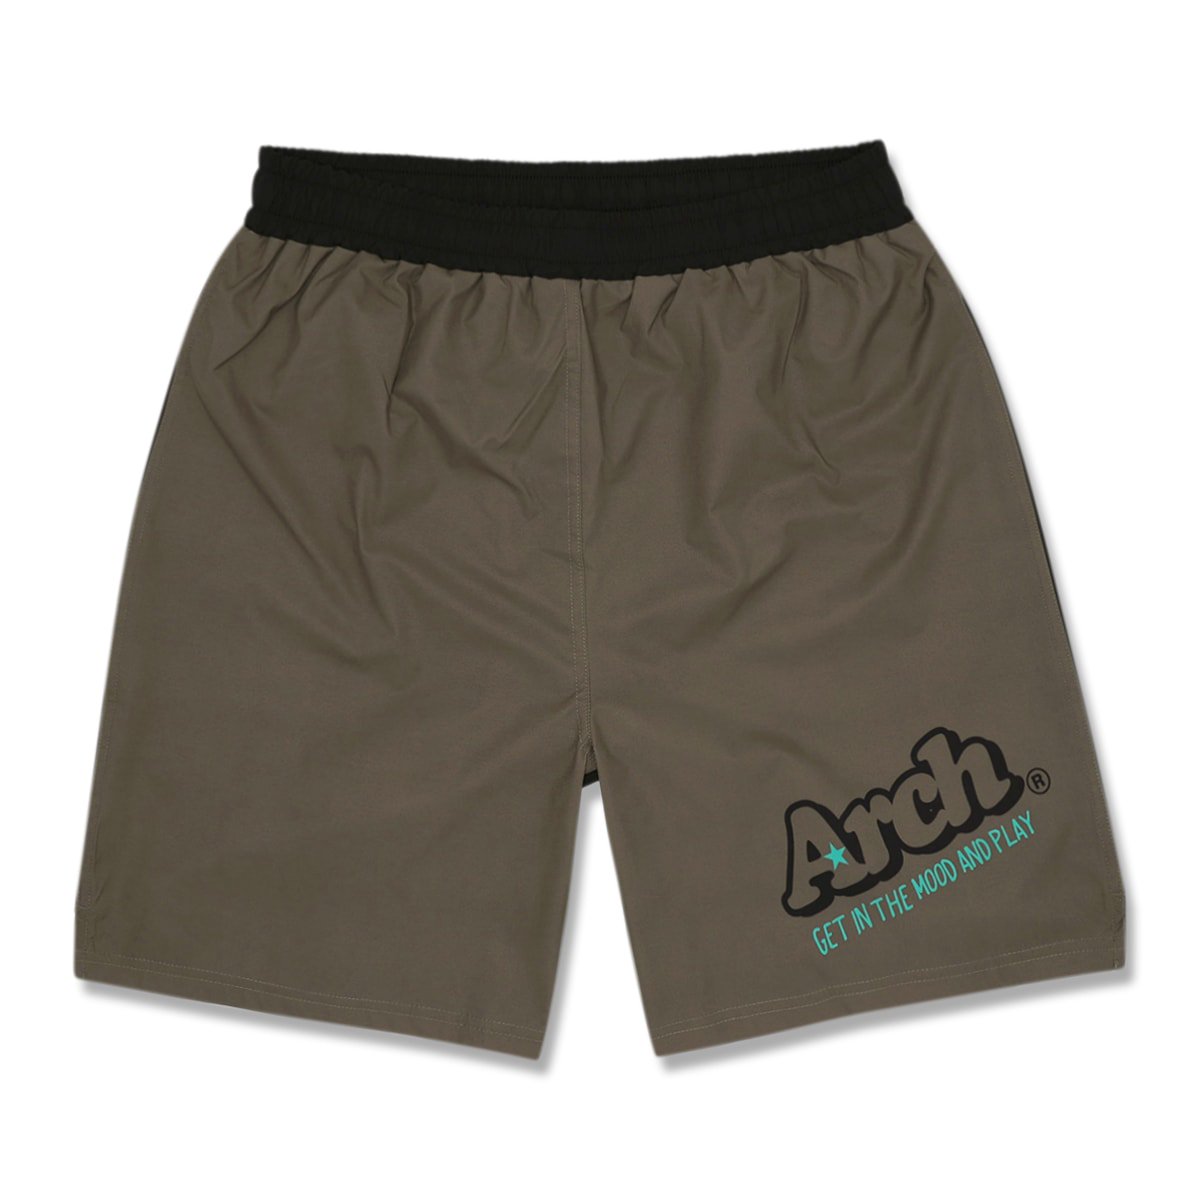 two sides shorts【blue】 - Arch ☆ アーチ [バスケットボール 